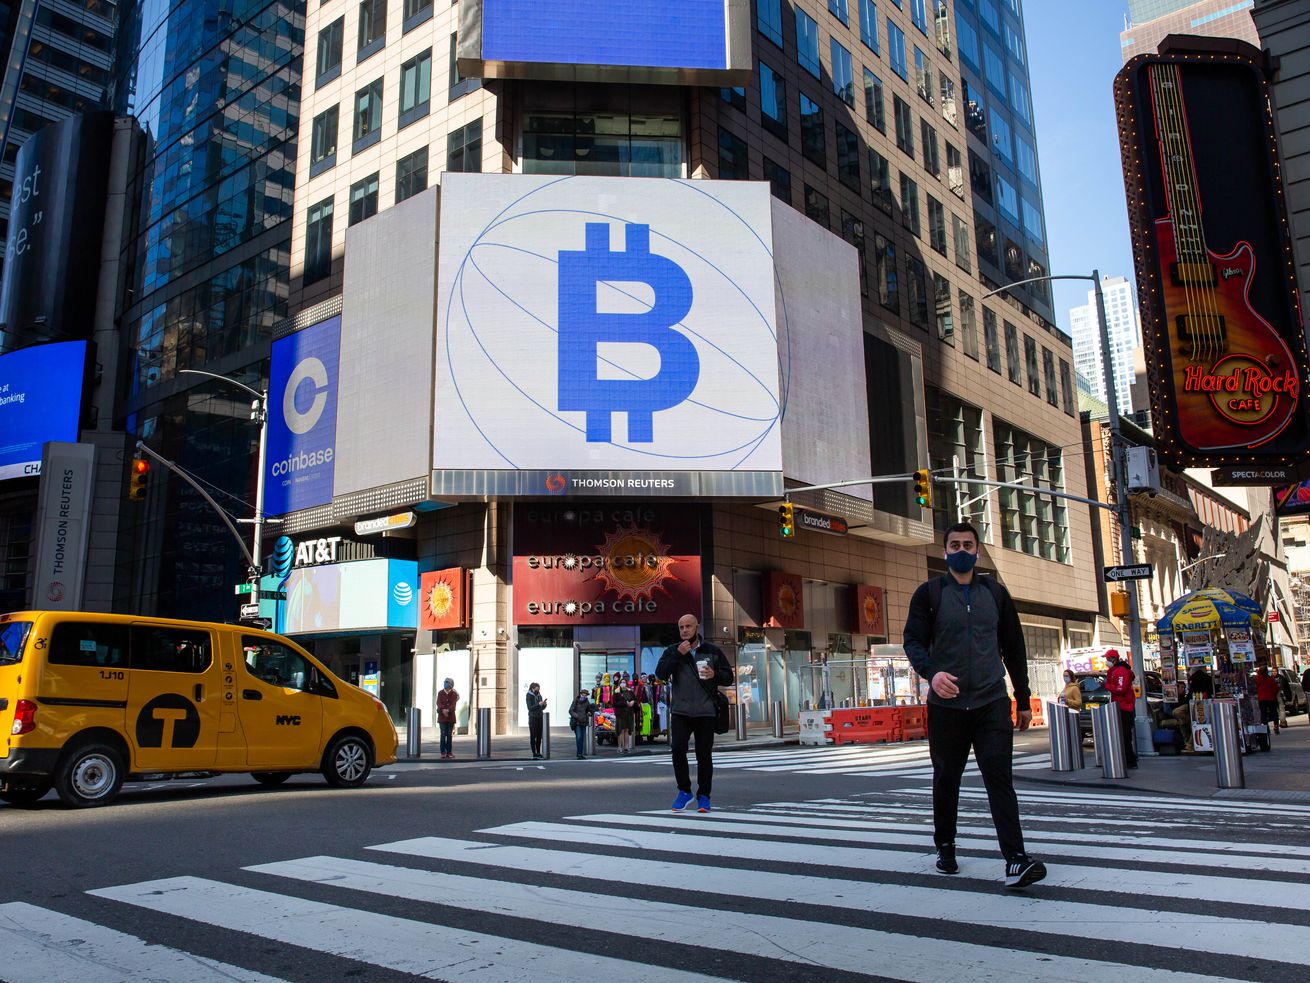 A digital sign outside the Nasdaq building in New York displays a bitcoin symbol that resembles a capital B combined with a dollar sign.